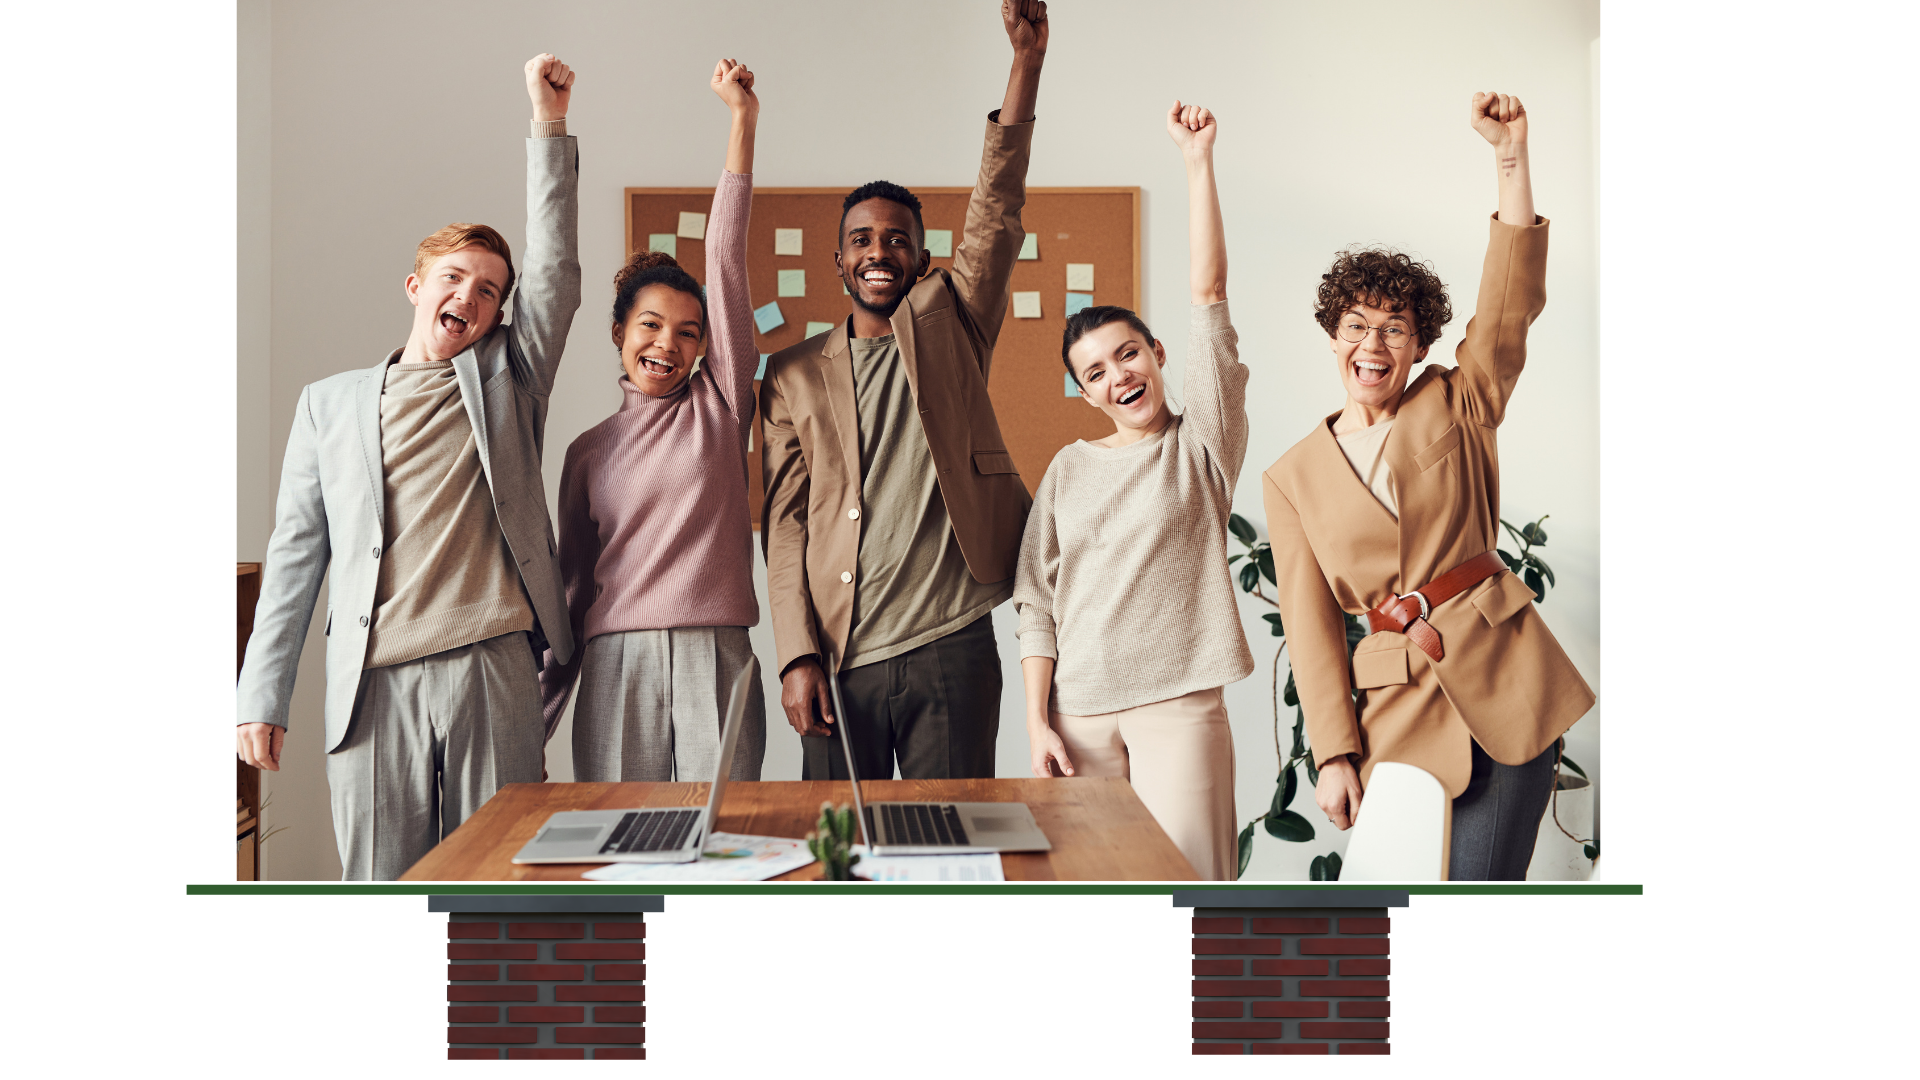 Several team members smiling with hands in the air, celebrating. The photo is balanced on a line supported by two brick columns.